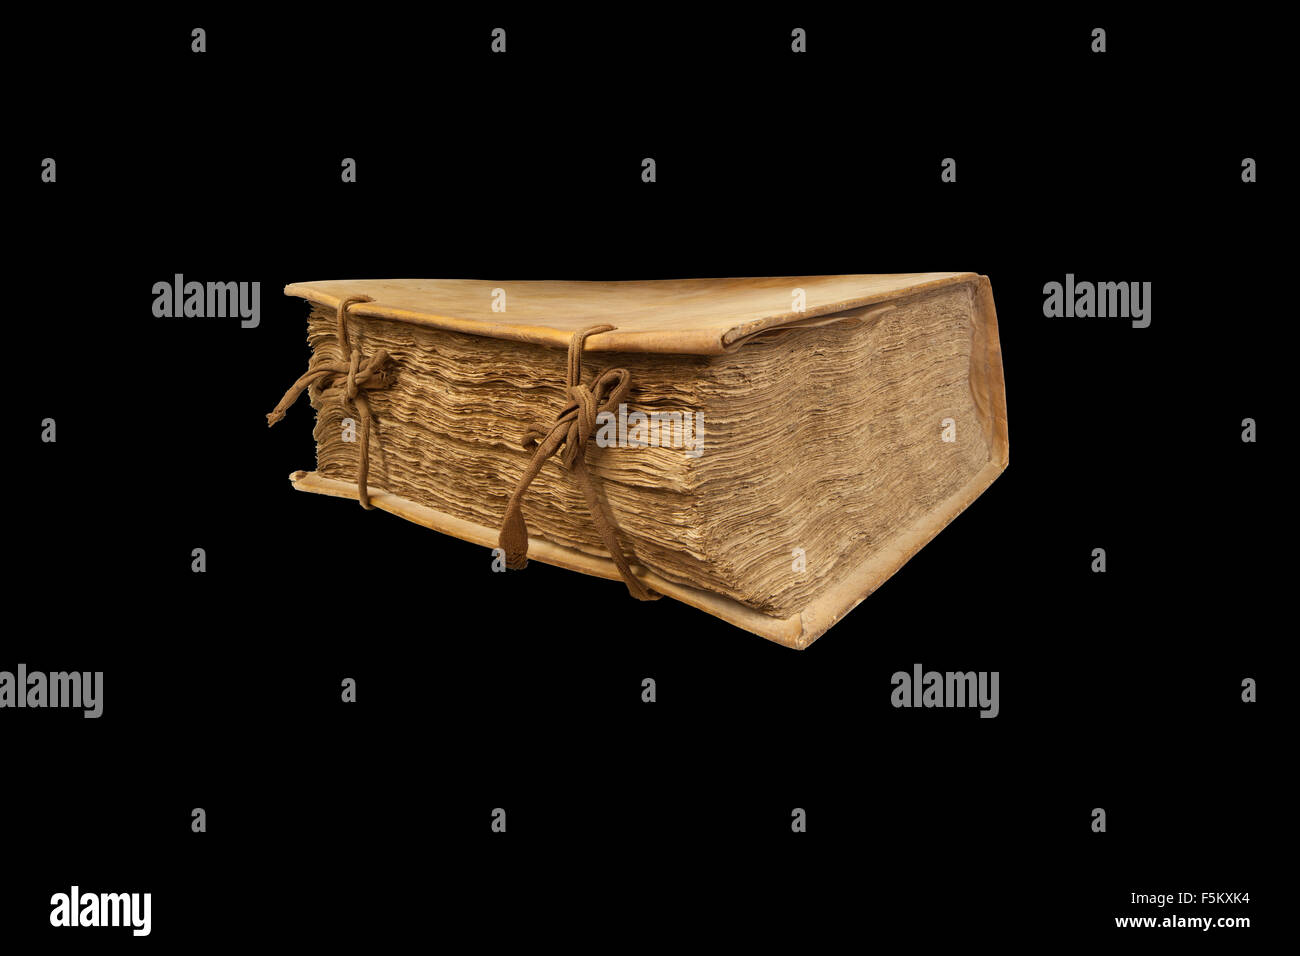 Ancient book. Clipping path. Side view. Closed book with streaks of fabric. Black background. Stock Photo